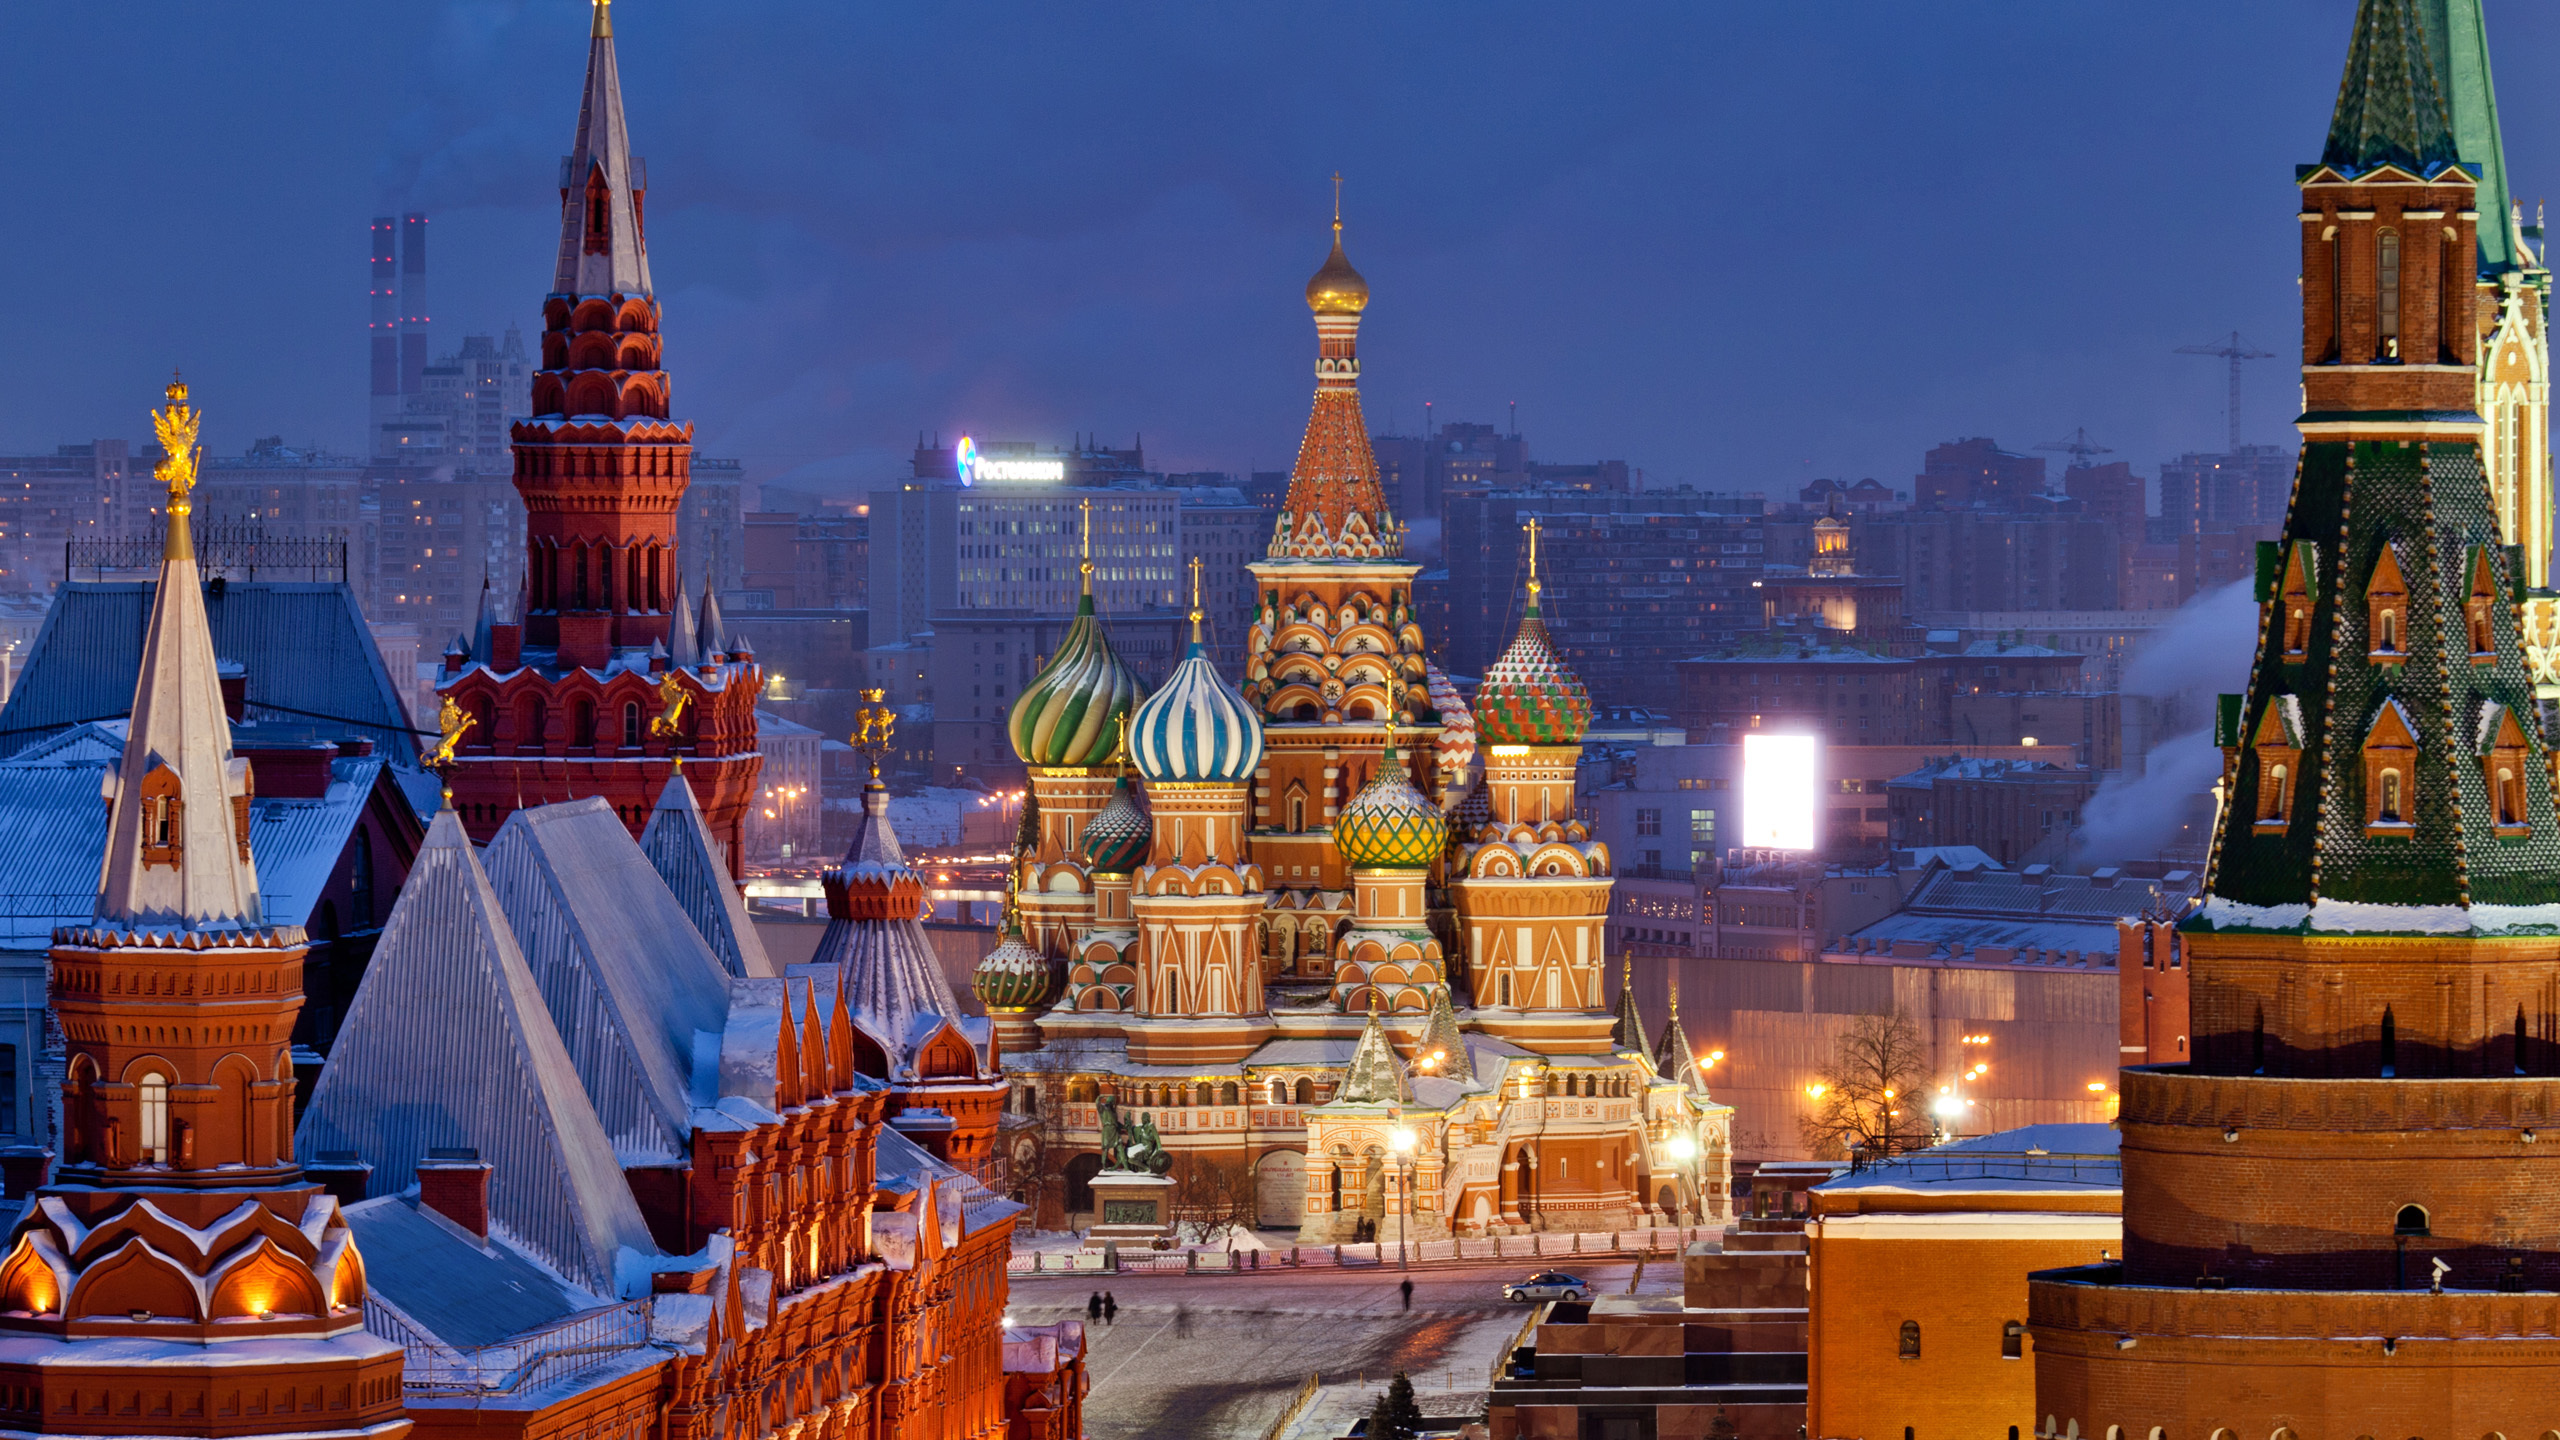 saint basil's cathedral, religious, cathedrals 32K